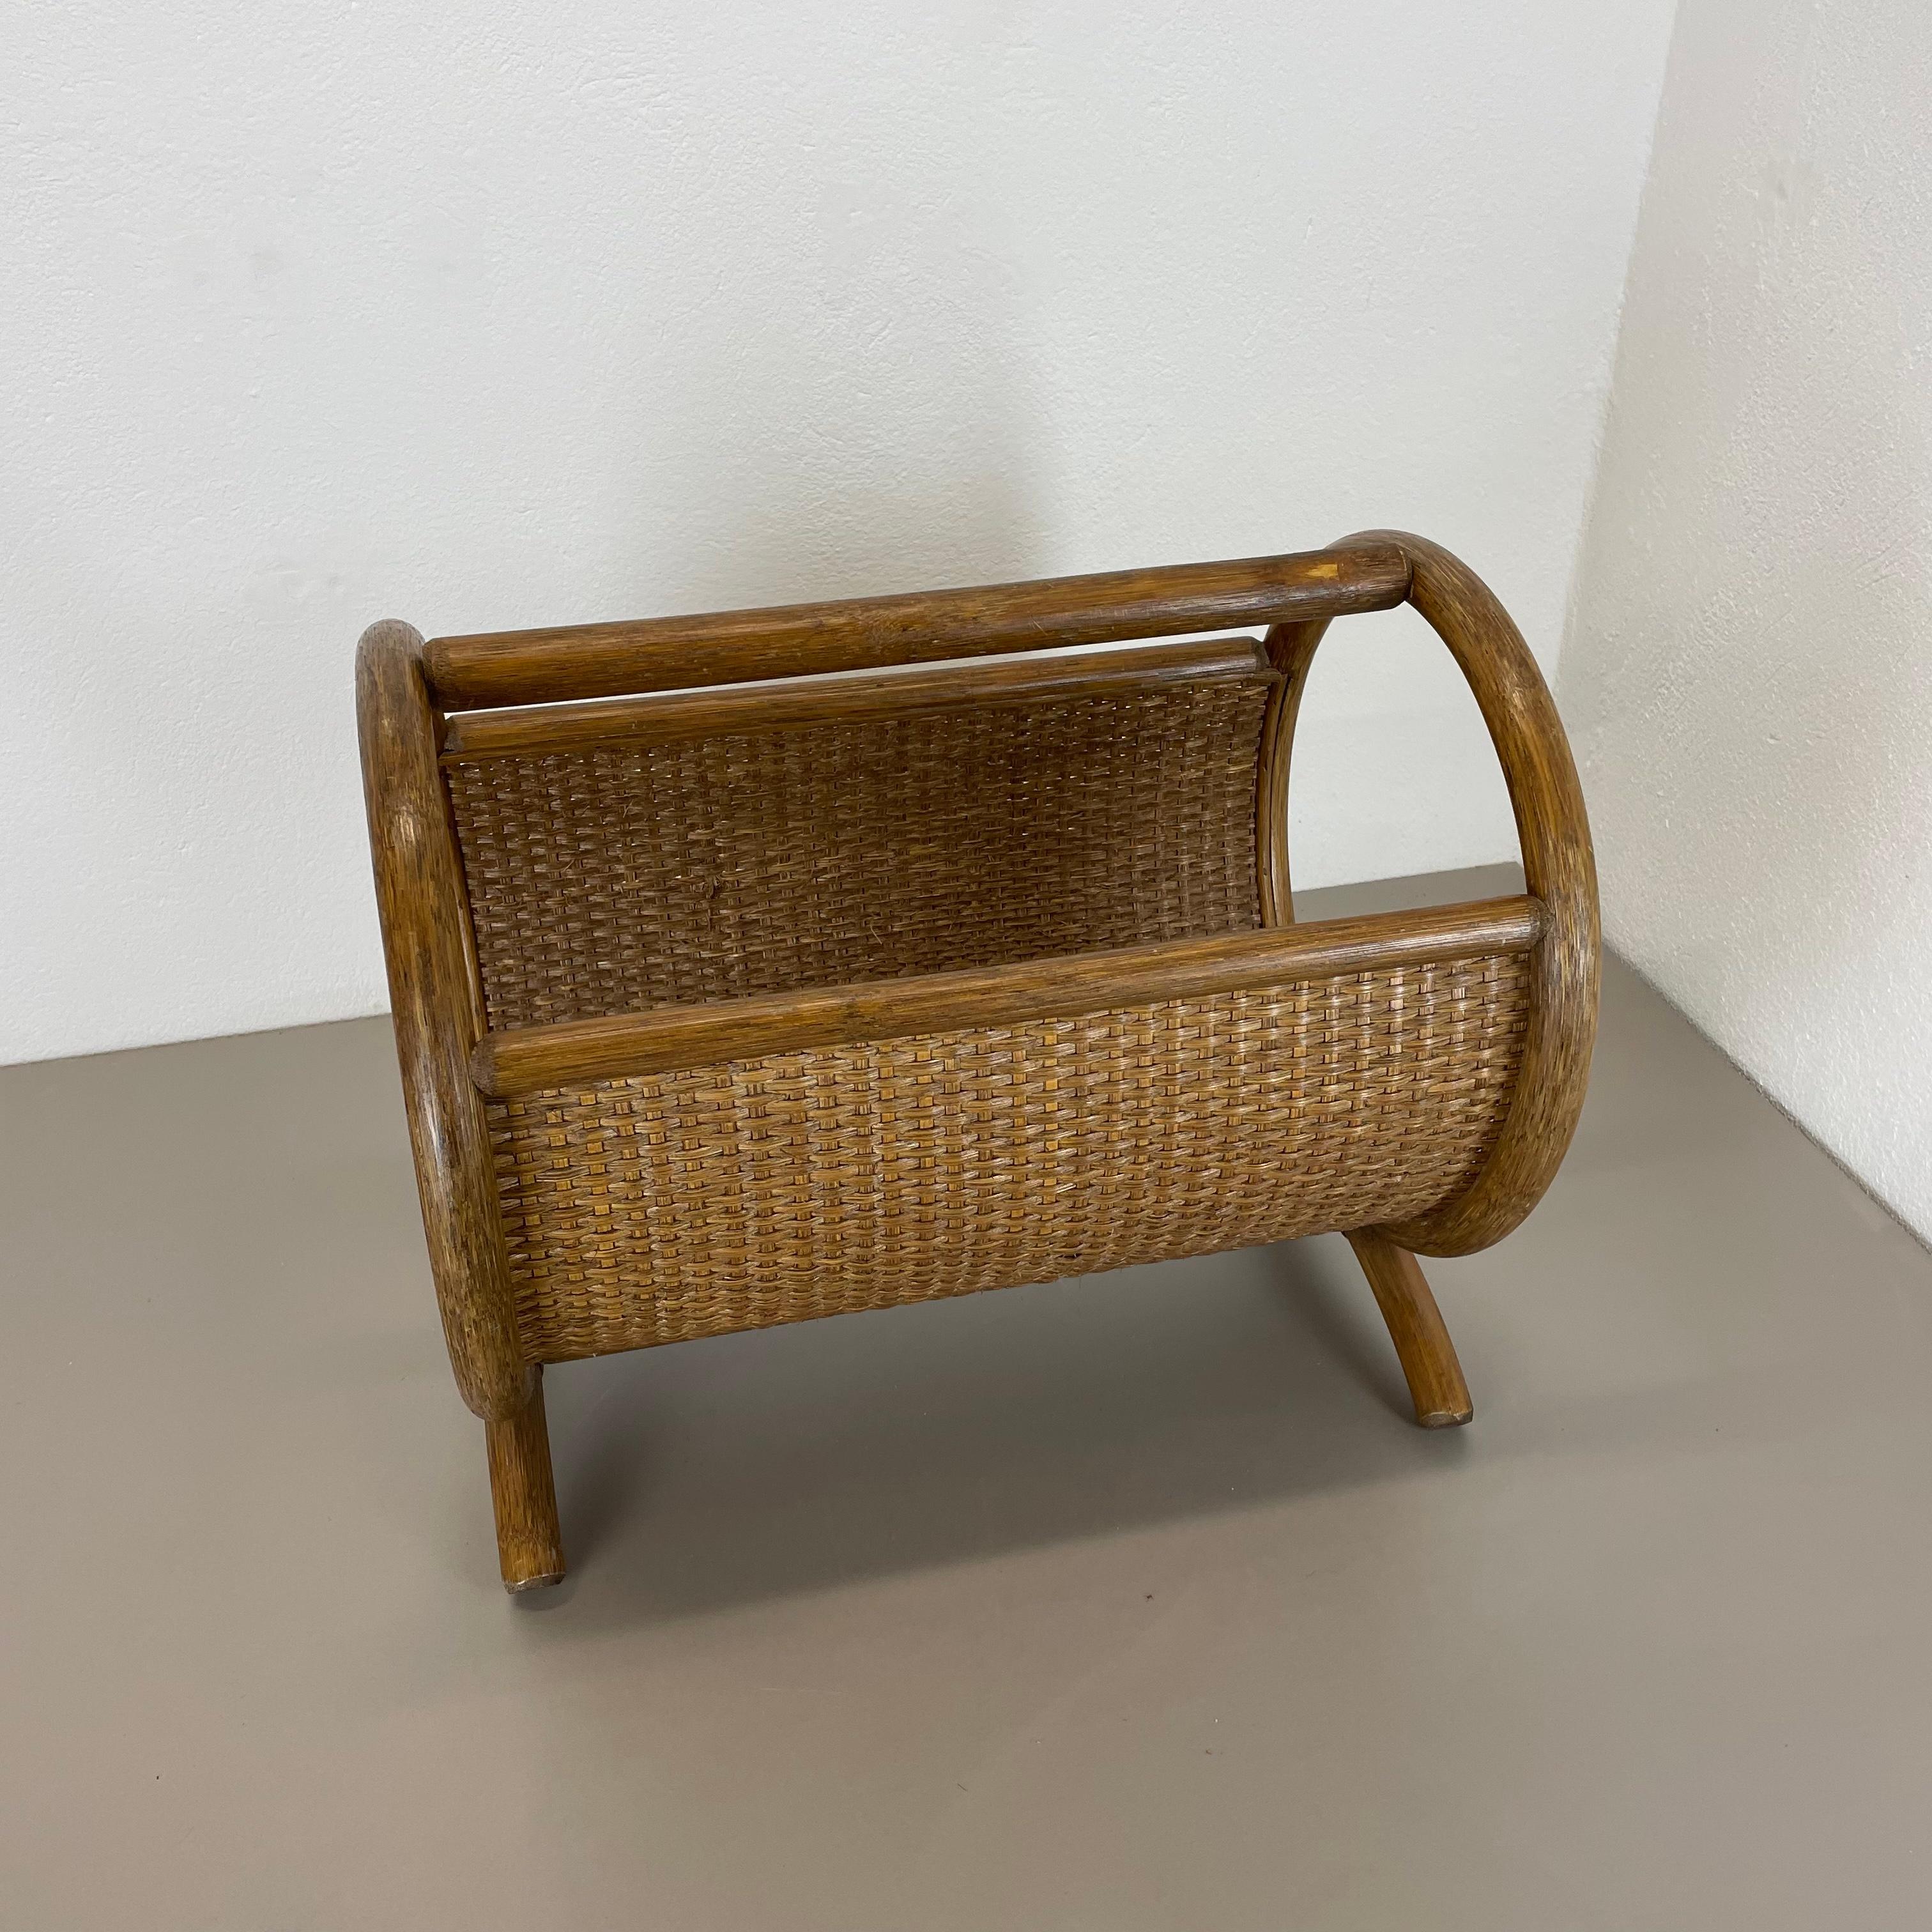 Aubock Style Mid-century Wood and Rattan Bauhaus Magazine Holder, France, 1980s For Sale 8